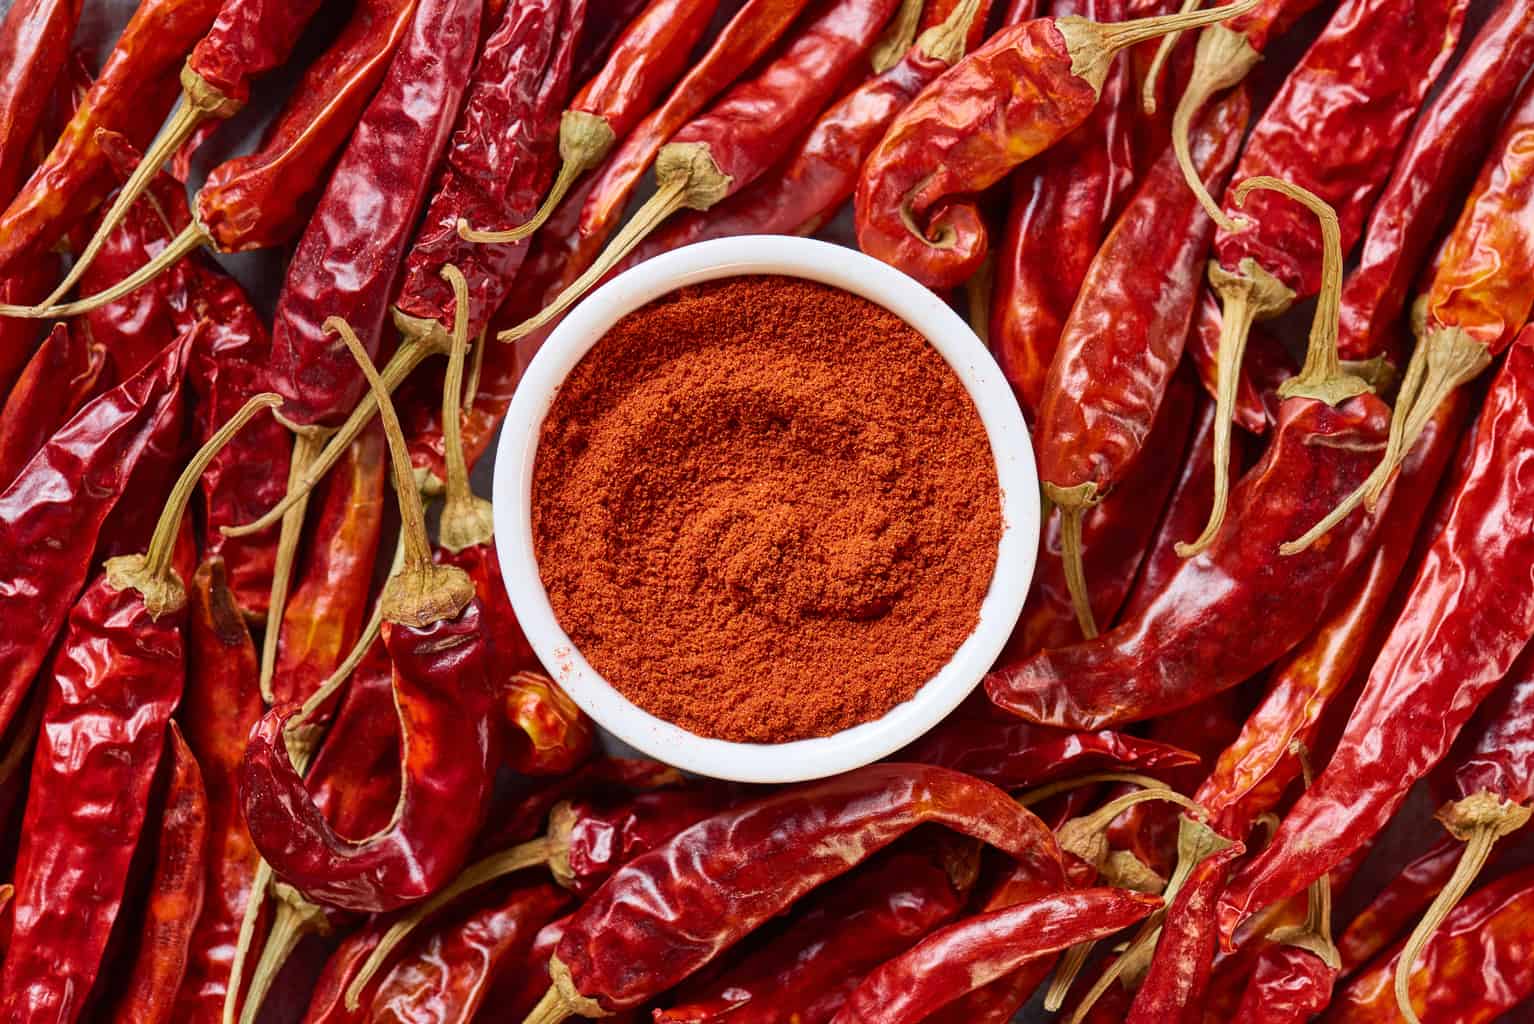 Grinded and wholesome chili peppers